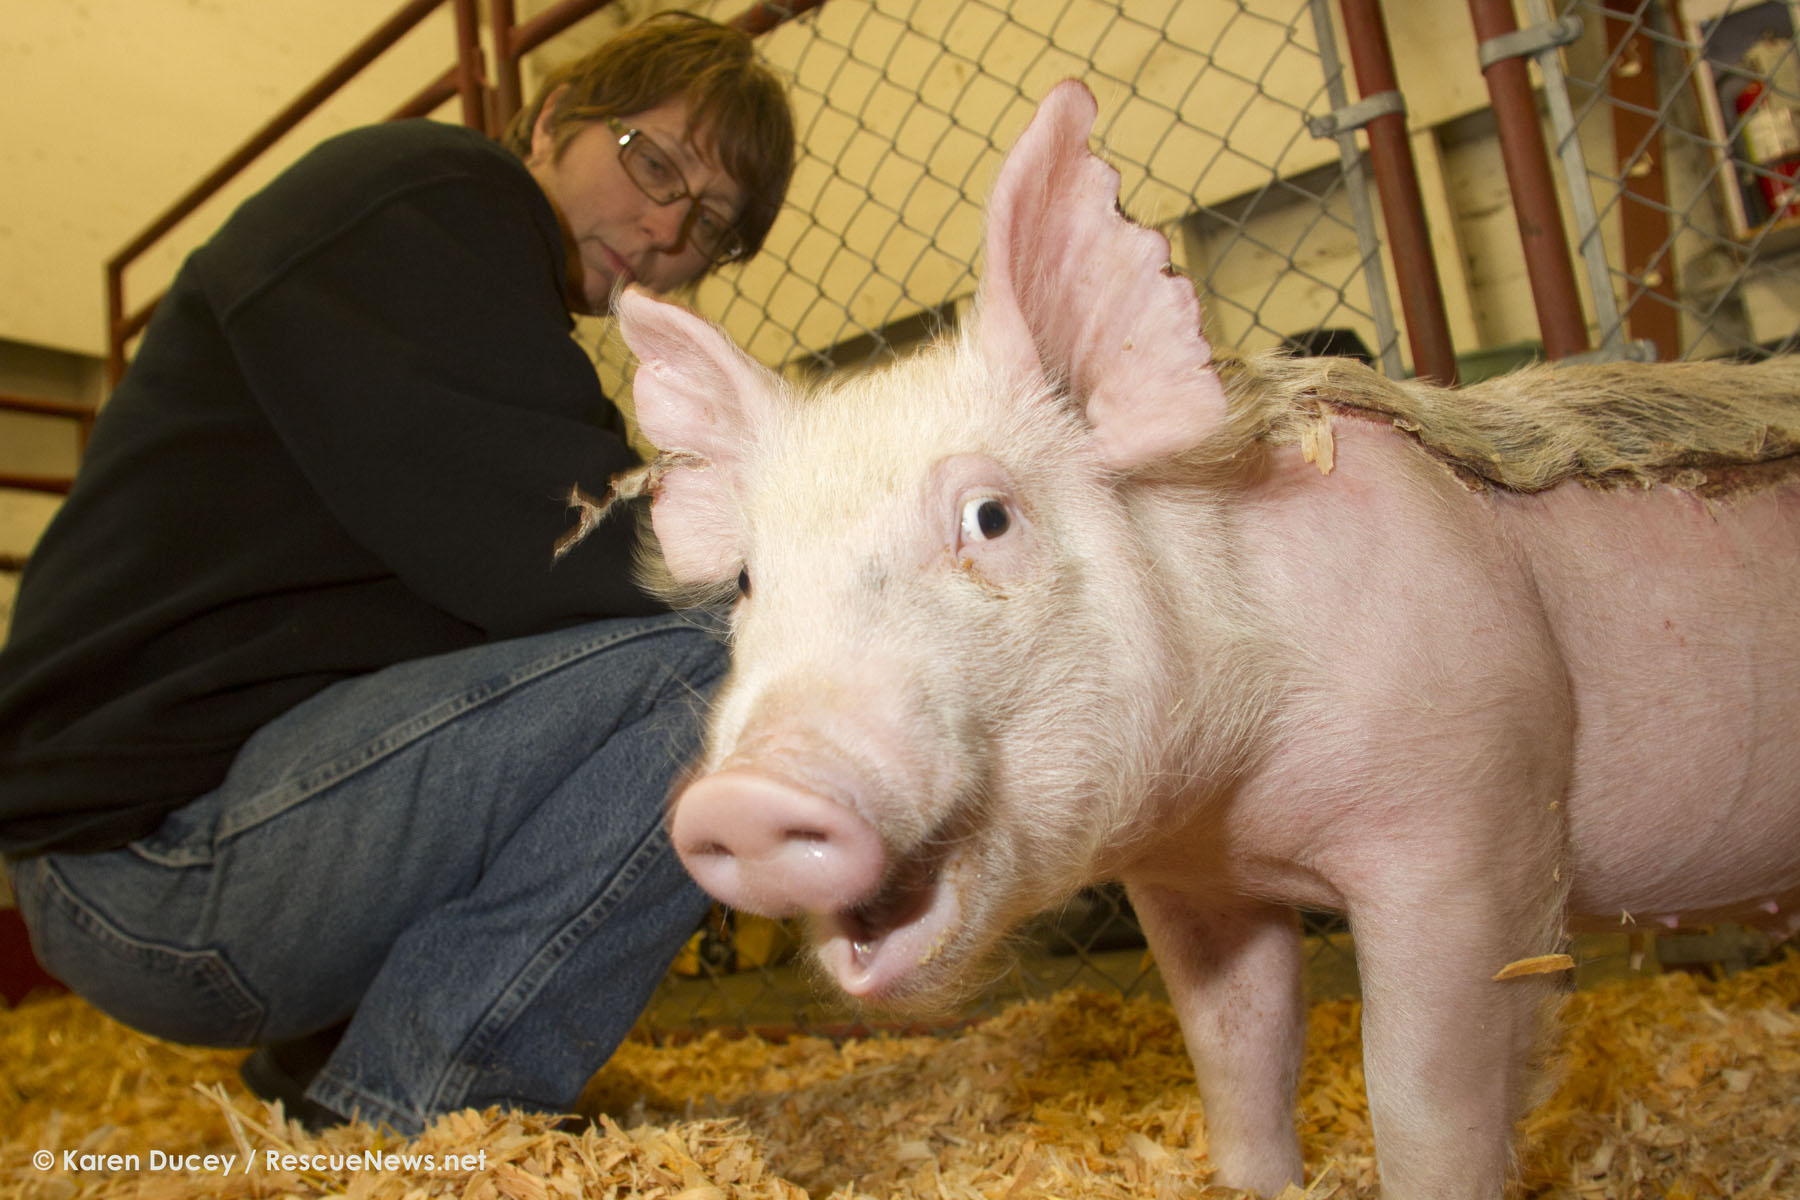 Tom, a Yorkshire piglet who was injured in a barn fire at the Washington State Fairgrounds several weeks ago, is fed marshmallows injected with antibiotics and anti-inflammatory medicine at the fairgrounds in Puyallup by Susan Becker on May 5, 2014.  Tom was badly burned along his back and ears.  It has developed into a large scab.  Becker is co-superintendent of the Traveling Farm and cares for Tom and other animals in the barn. Once healed Tom will be returned to his owner, Kyler Young, who is using him as a breeding boar at his families' farm, Proverty Hill Farm.  The farm has over 600 pigs on it which they sell to 4-H kids.  Tom originally came from a farm in Anacortes.  The Young's paid hundreds of dollars for him. Becker says the fire fighters worked really hard to keep the animals alive.